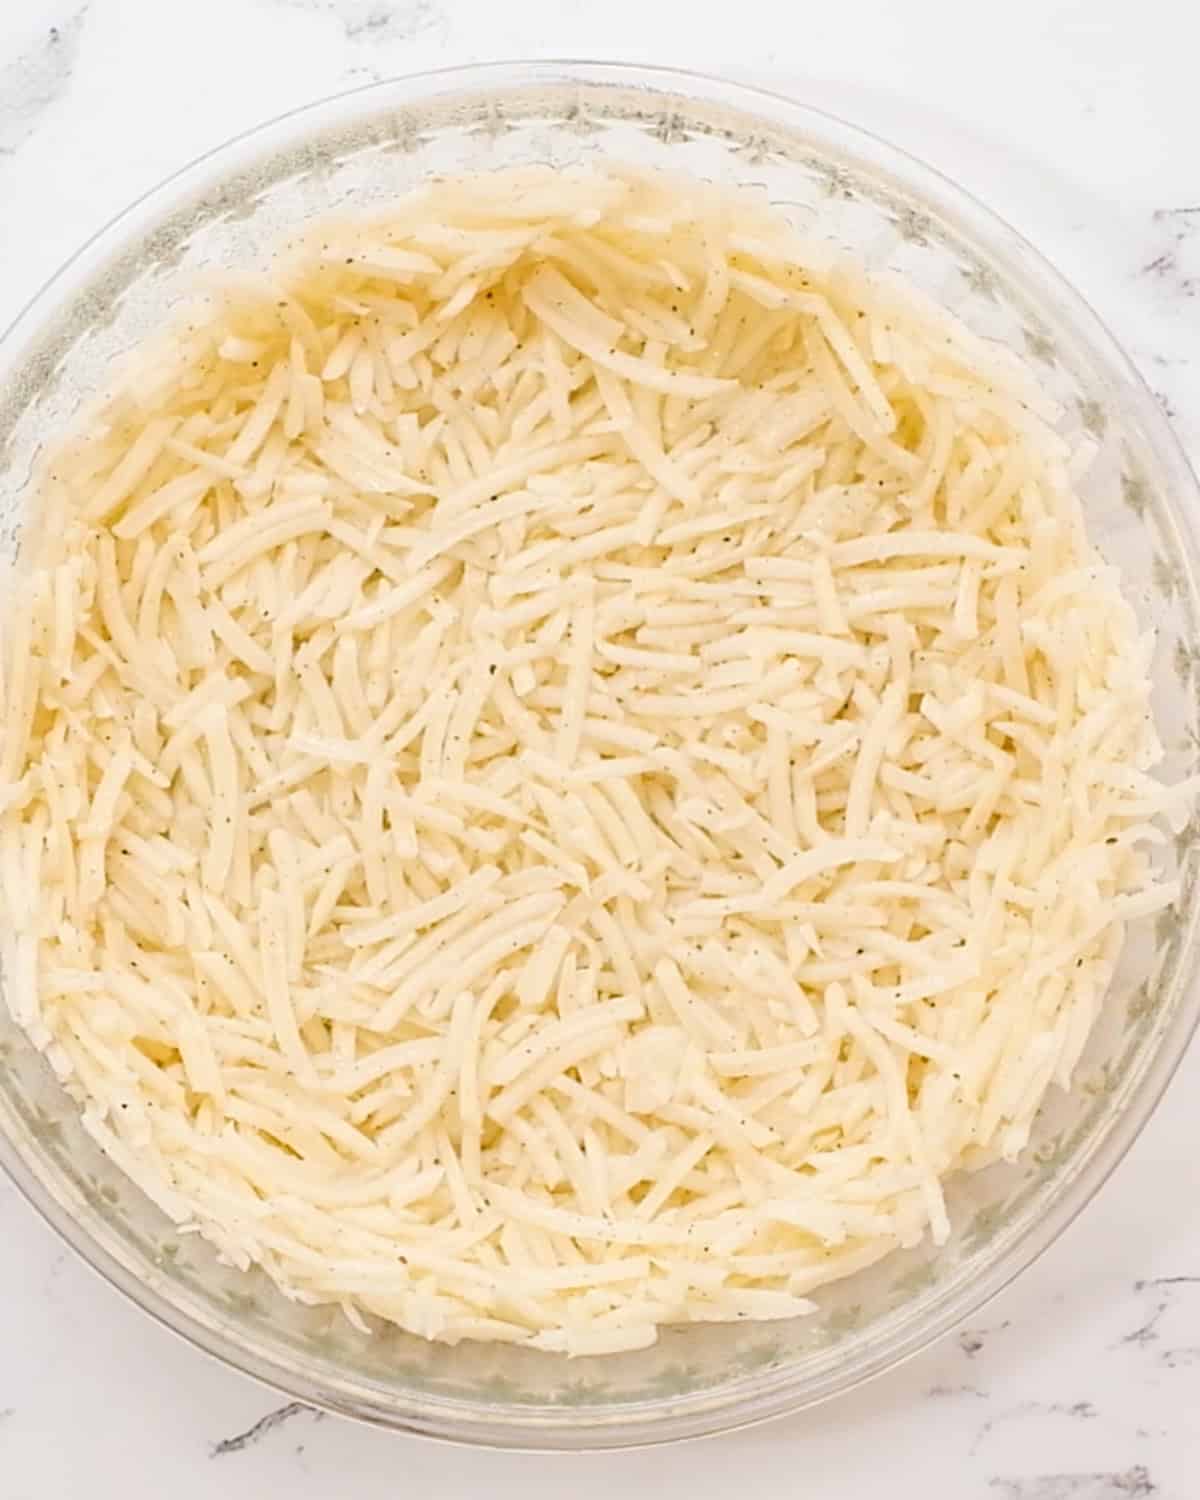 hash brown crust in a pie dish before baking